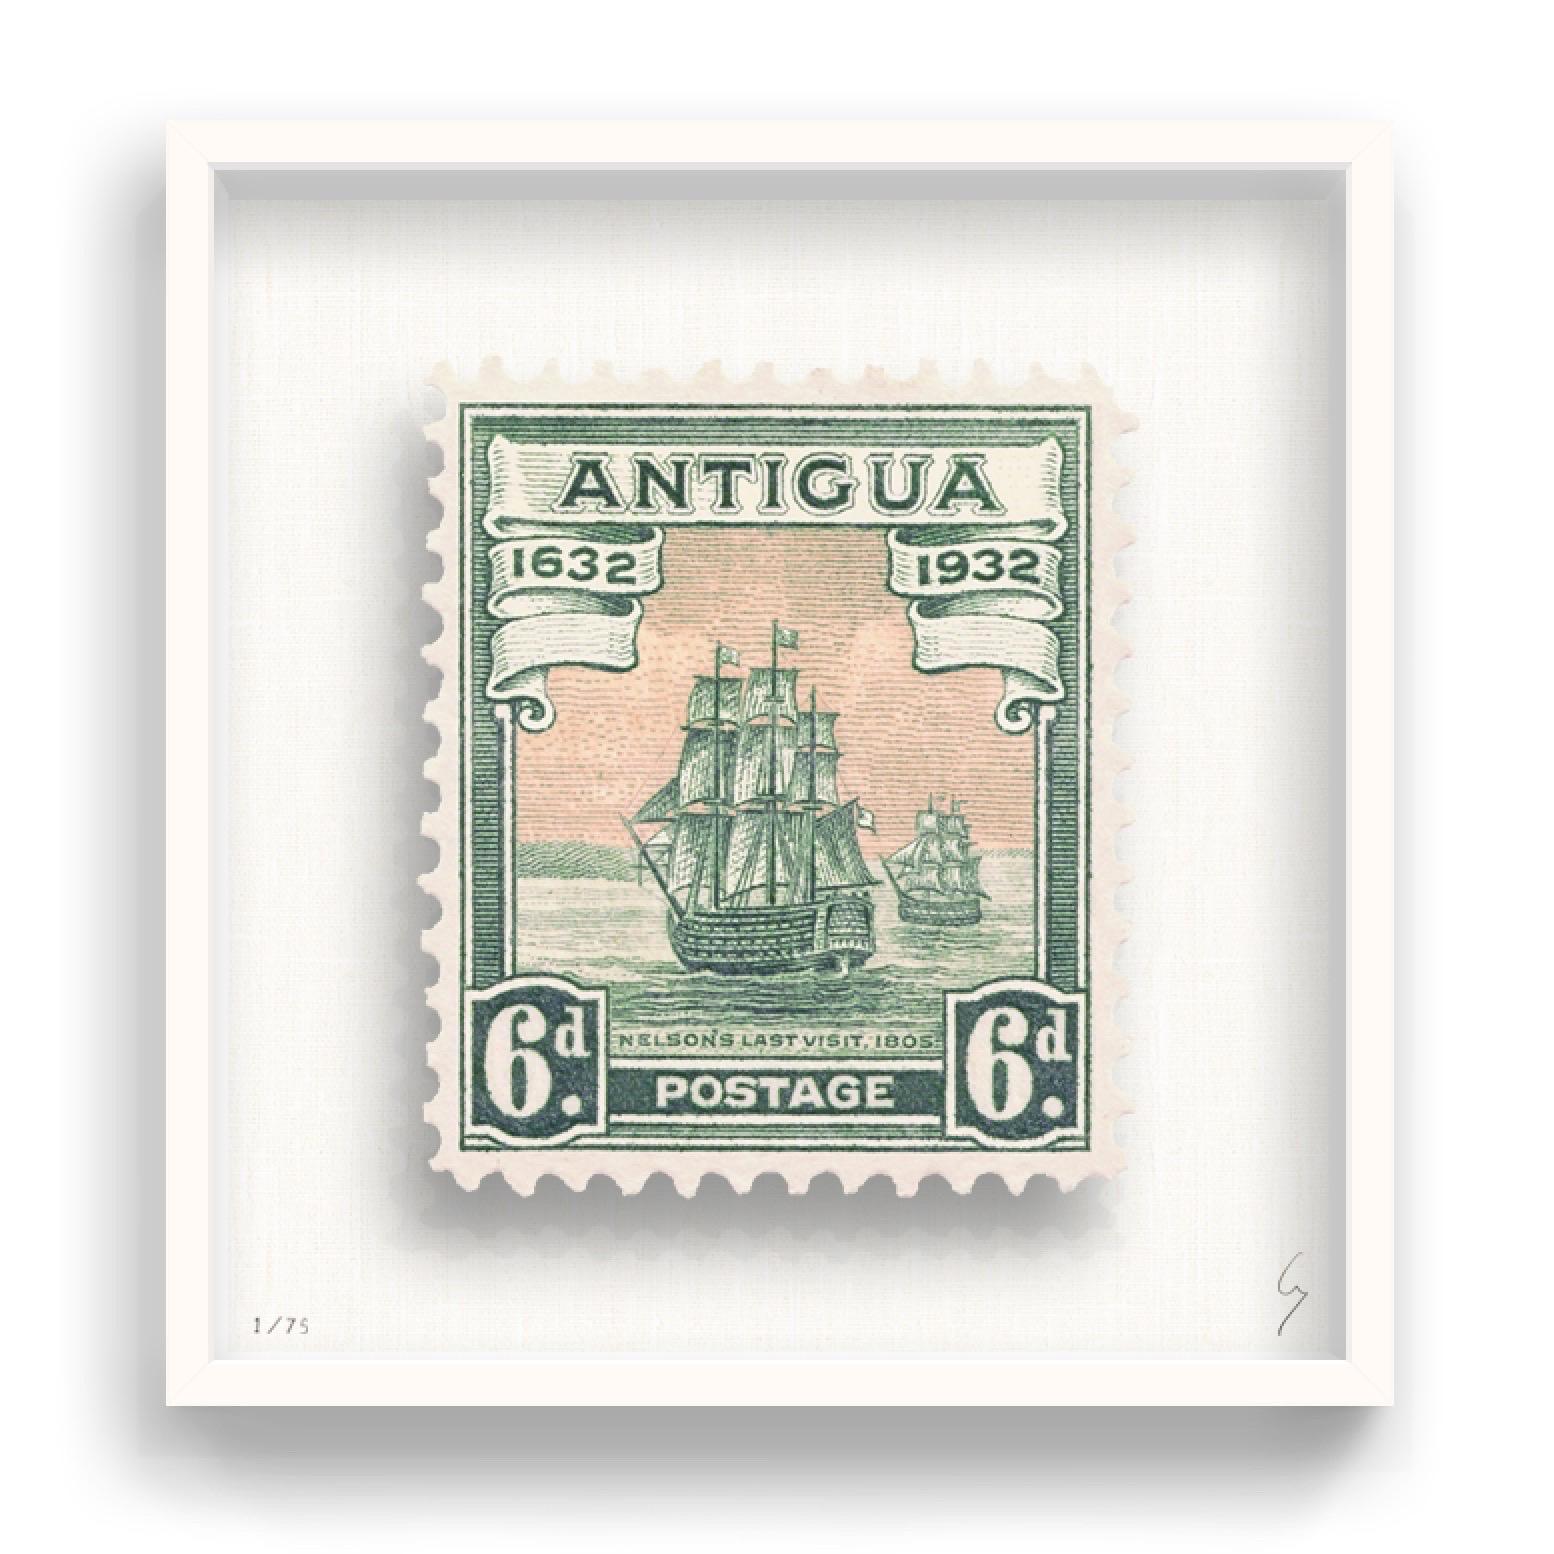 Guy Gee, Antigua (medium)

Hand-engraved print on 350gsm on G.F Smith card
53 x 56cm (20 4/5 x 22 2/5 in)
Frame included 
Edition of 75 

Each artwork by Guy had been digitally reimagined from an original postage stamp. Cut out and finished by hand,